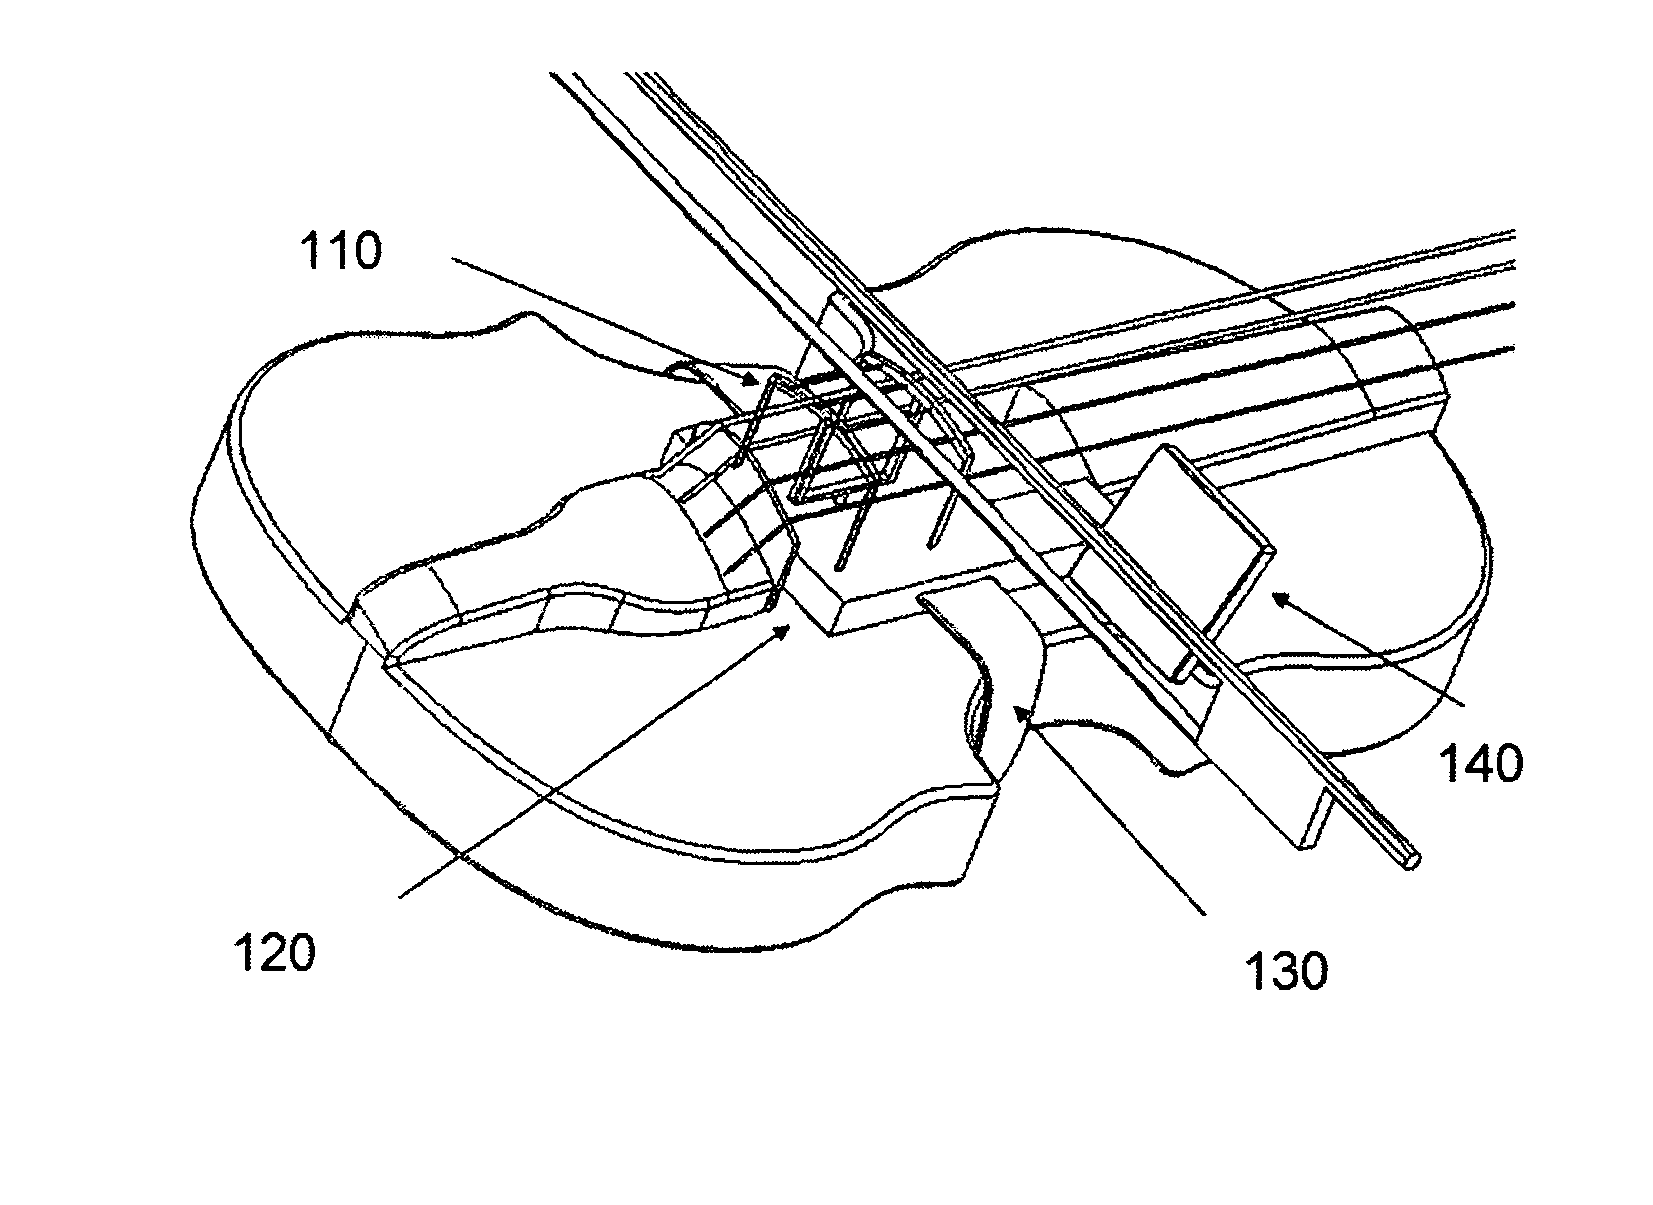 Bow-to-string pressure training device for bowed string music instruments